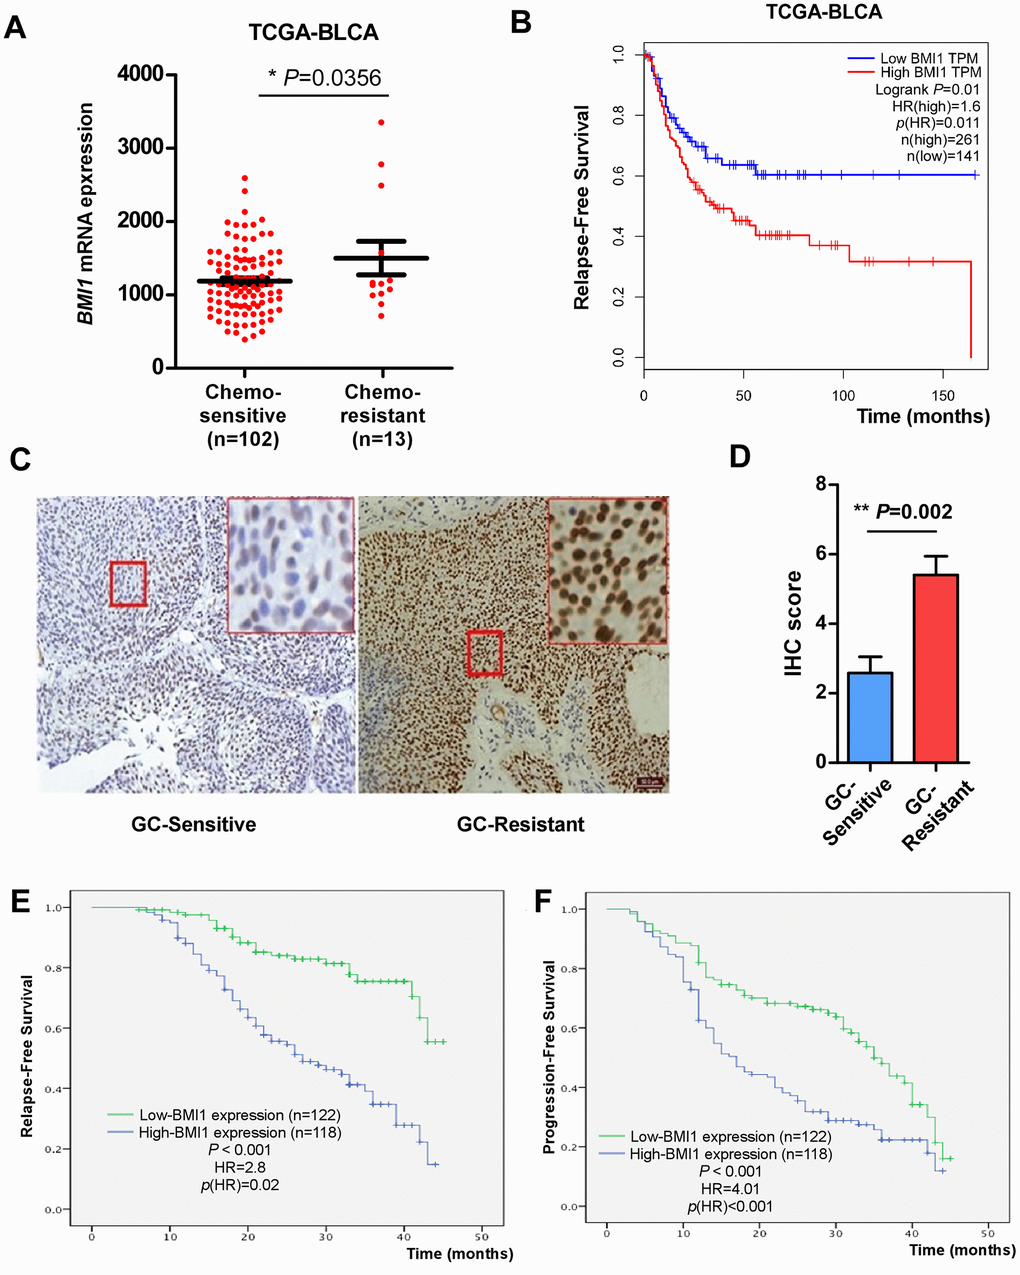 Elevated BMI1 in GC-chemoresistant bladder cancer conferred poor prognosis. (A) BMI1 mRNA expression in bladder cancer tissues of patients partial response to chemotherapy versus patients complete response to chemotherapy from TCGA-BLCA database. (B) Relapse-free survival of patients in TCGA-BLCA dataset with low versus high levels of BMI1 mRNA. (C) IHC analysis of BMI1 protein expression in bladder cancer tissues of patients resistant to GC chemotherapy and that sensitive to GC chemotherapy, magnification, ×200 & ×400. (D) Statistical quantification of the IHC score of BMI1 staining in bladder cancer specimens from patients resistant versus sensitive to GC chemotherapy. (E) Relapse-free survival of patients with bladder cancer with low versus high BMI1 expression. (F) Progression-free survival of patients with bladder cancer with low versus high BMI1 expression. *P 